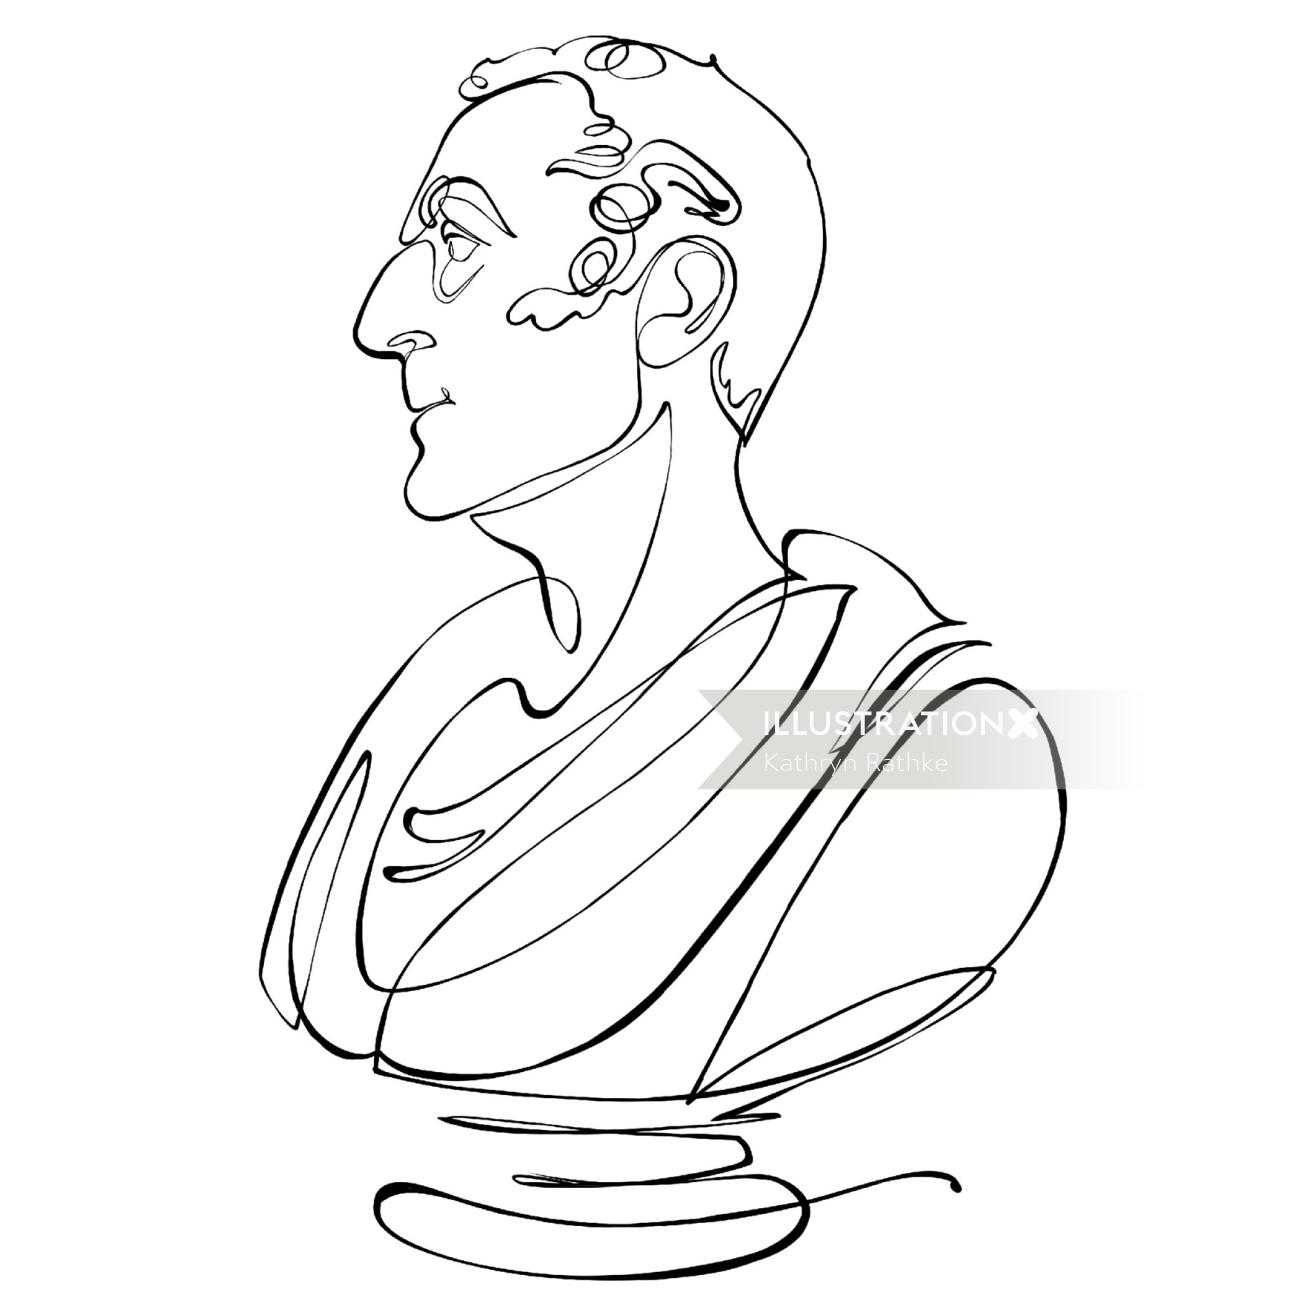 One-line animation depicting Trinity College's renowned thinker statue